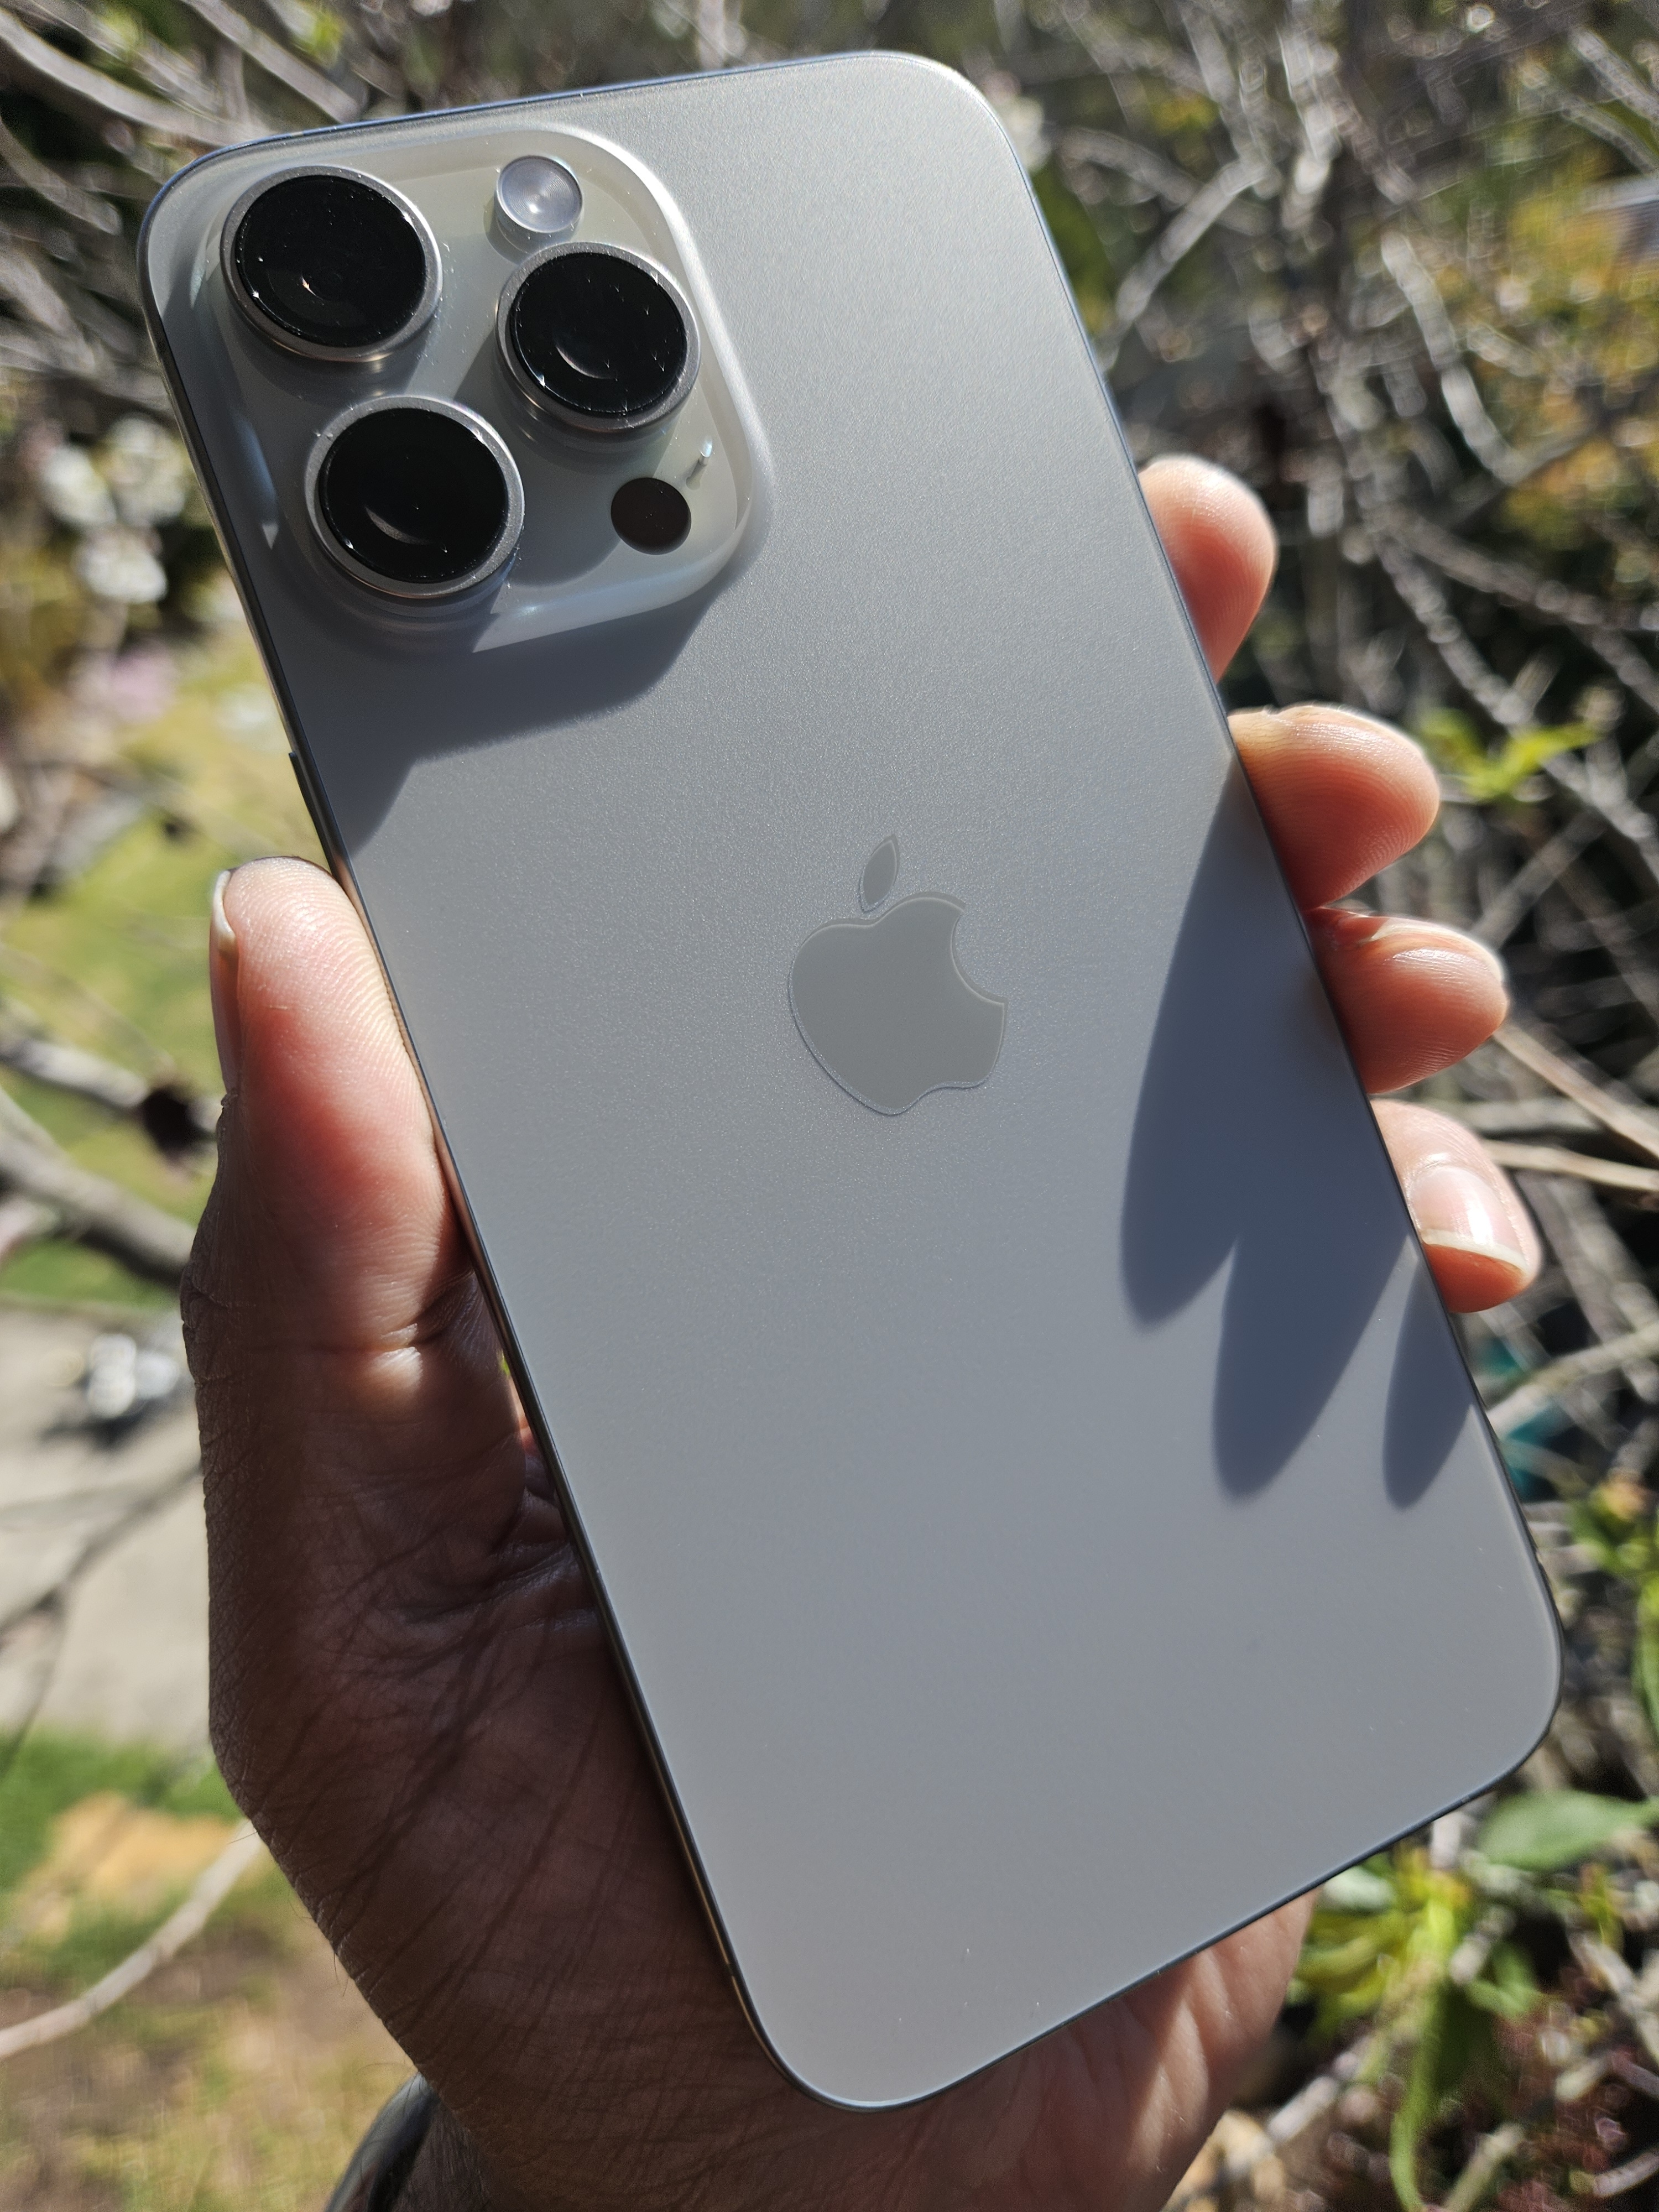 iPhone 15 Pro Max Review: All the Top Features in a Sleek Titanium